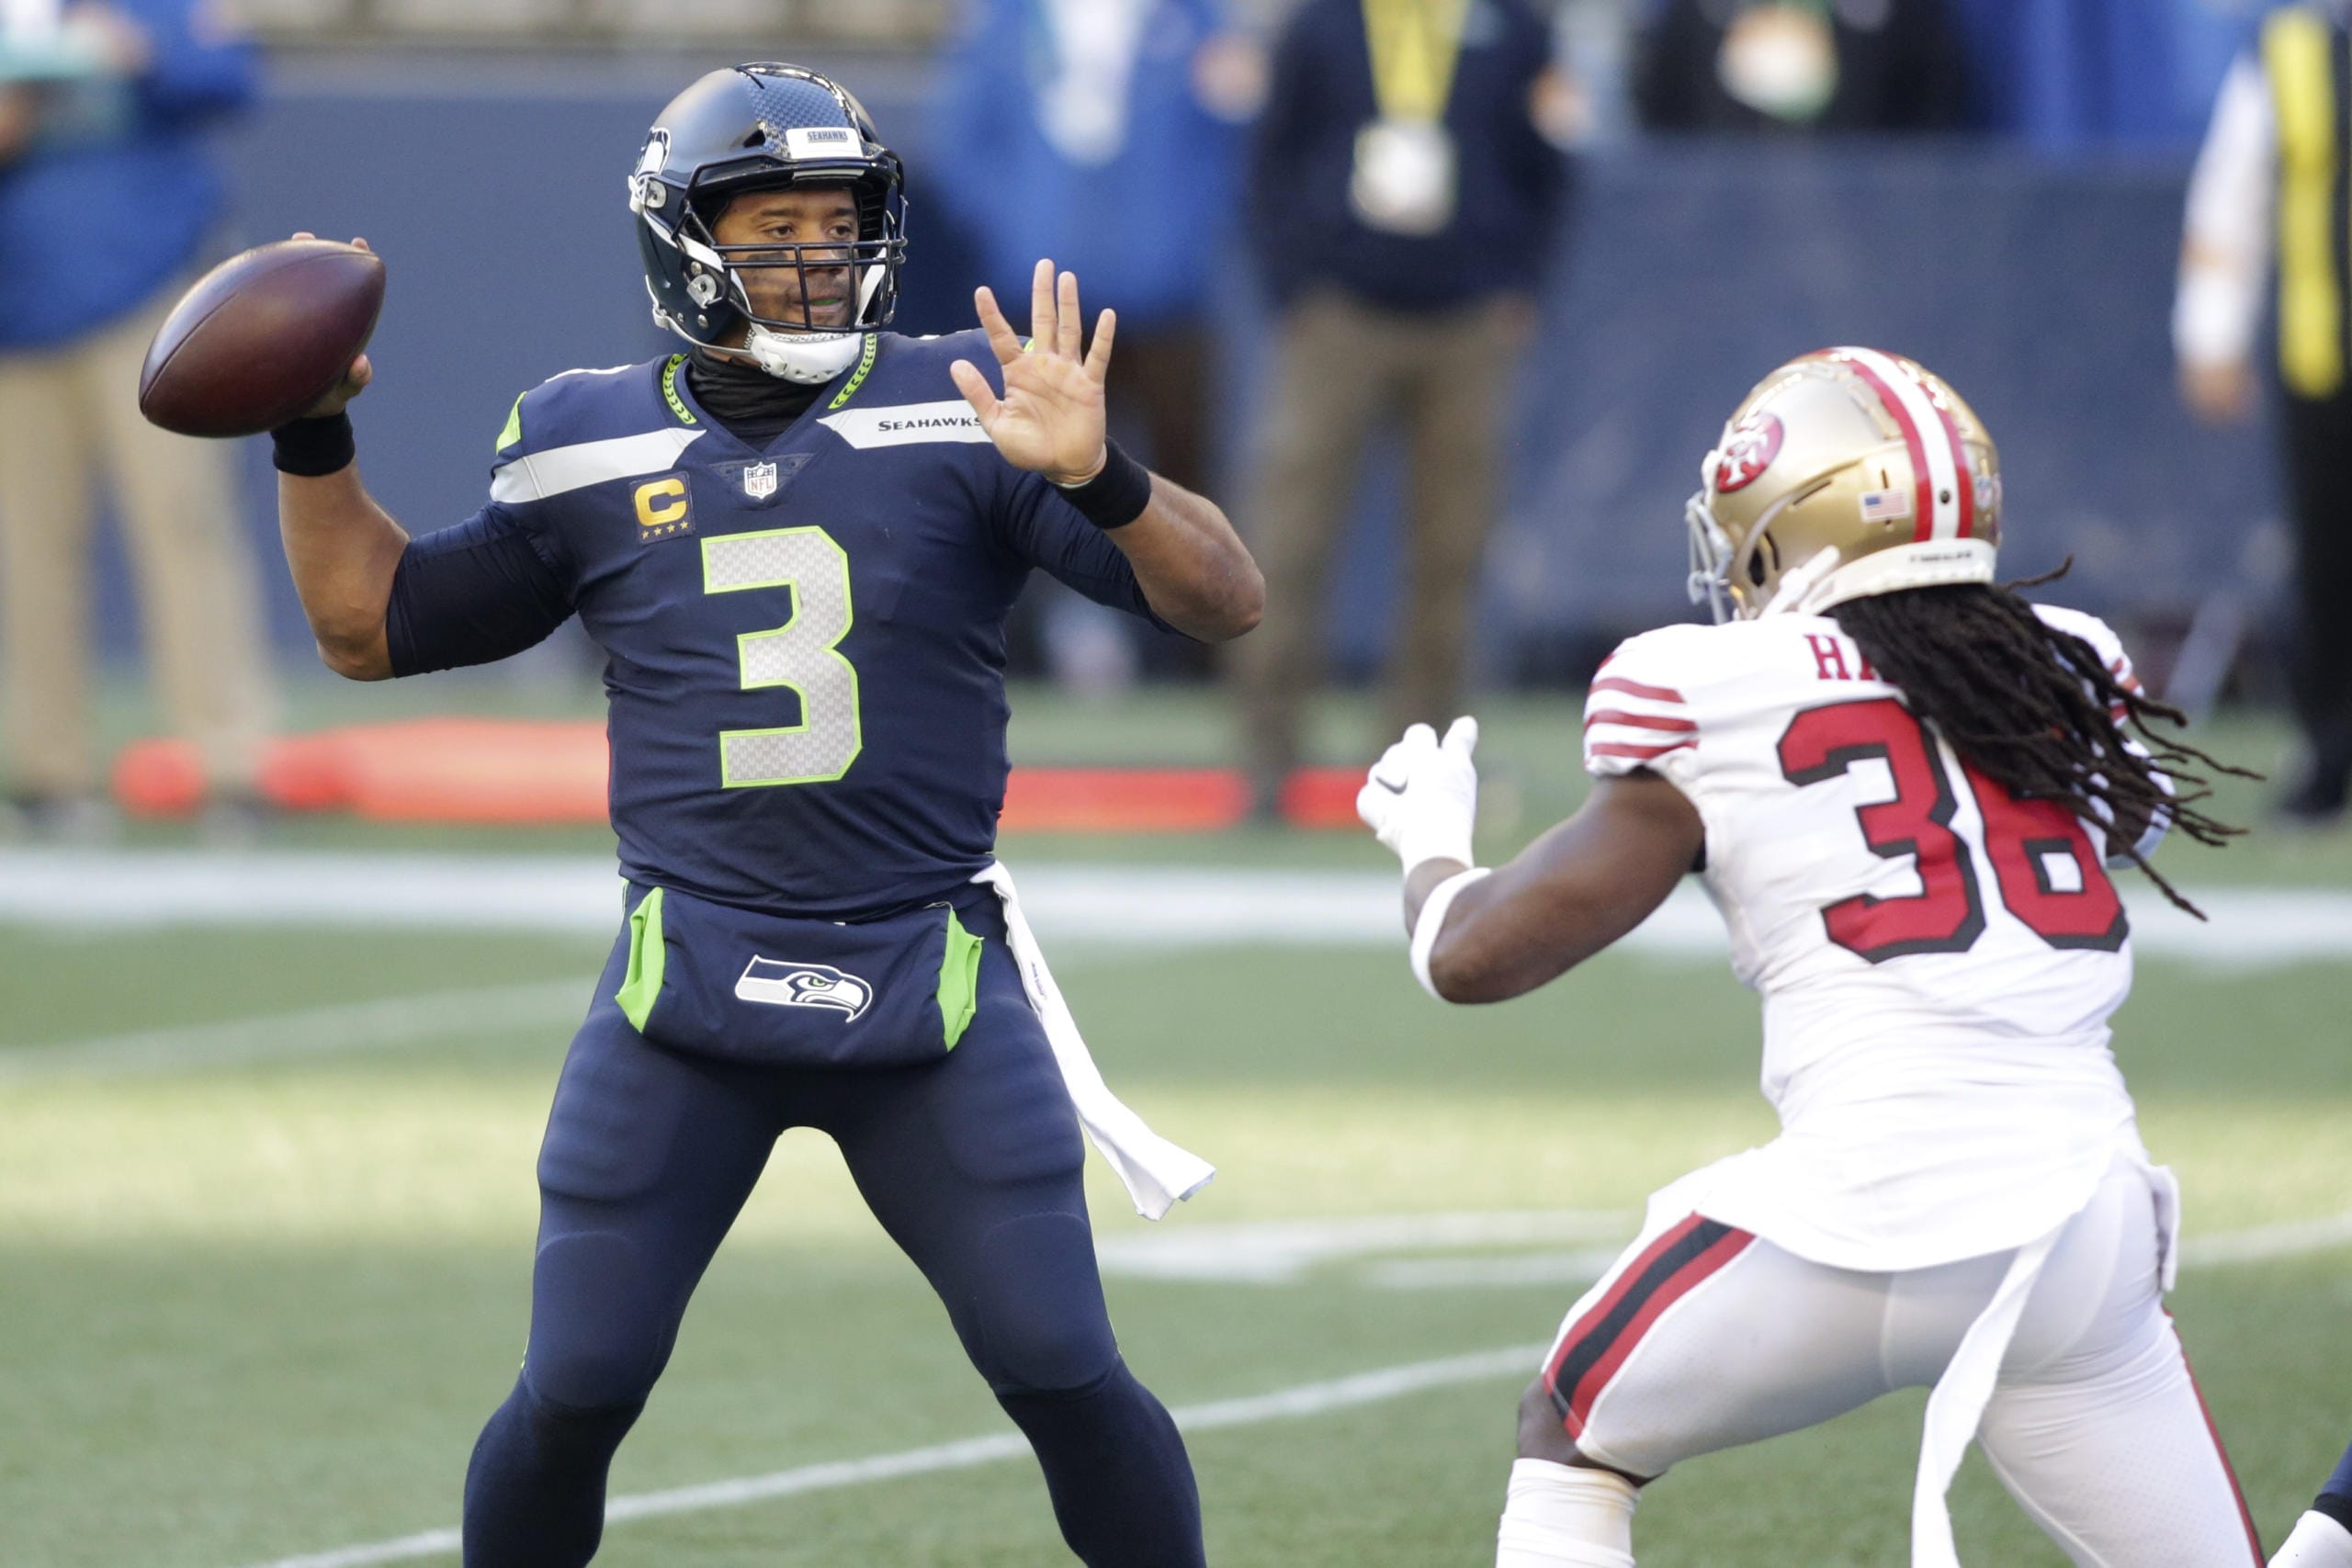 Seattle Seahawks quarterback Russell Wilson (3) makes a touchdown pass to wide receiver DK Metcalf (not shown) as San Francisco 49ers safety Marcell Harris, right, pressures during the first half of an NFL football game, Sunday, Nov. 1, 2020, in Seattle.